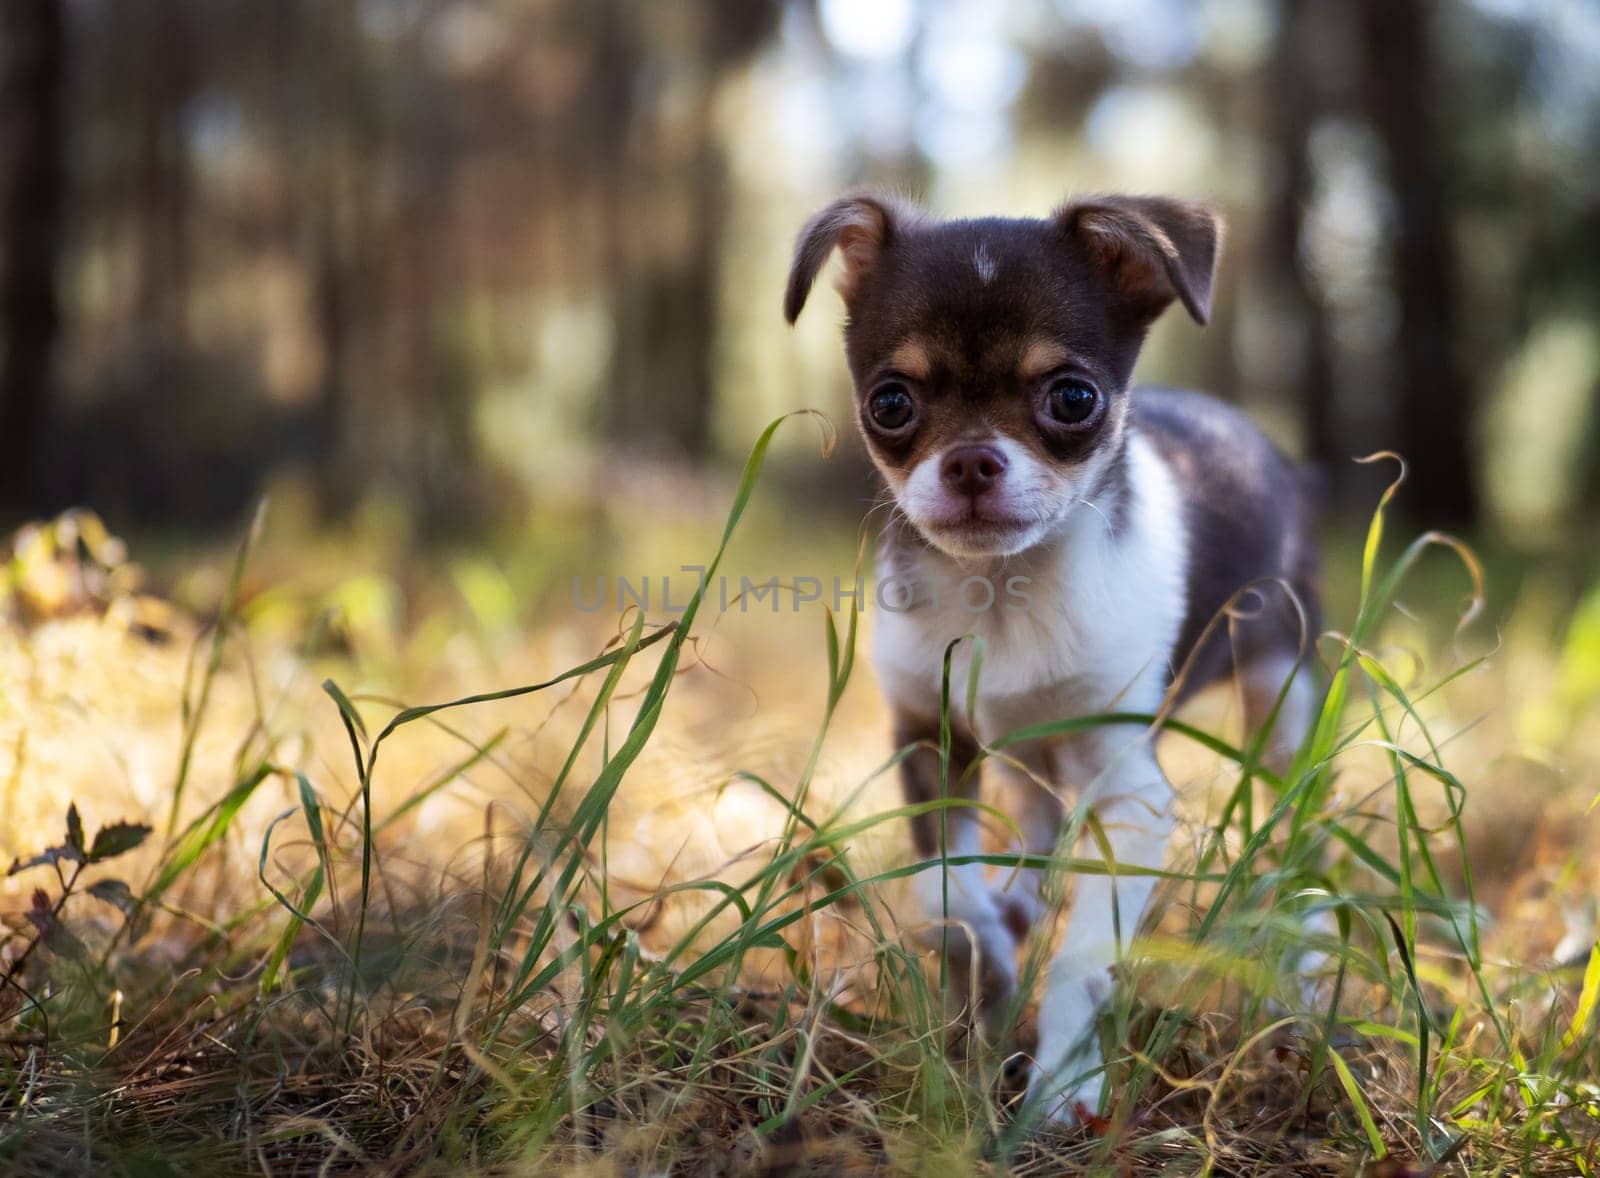 Tiny Chihuahua Puppy Amidst Fall's Embrace by gcm